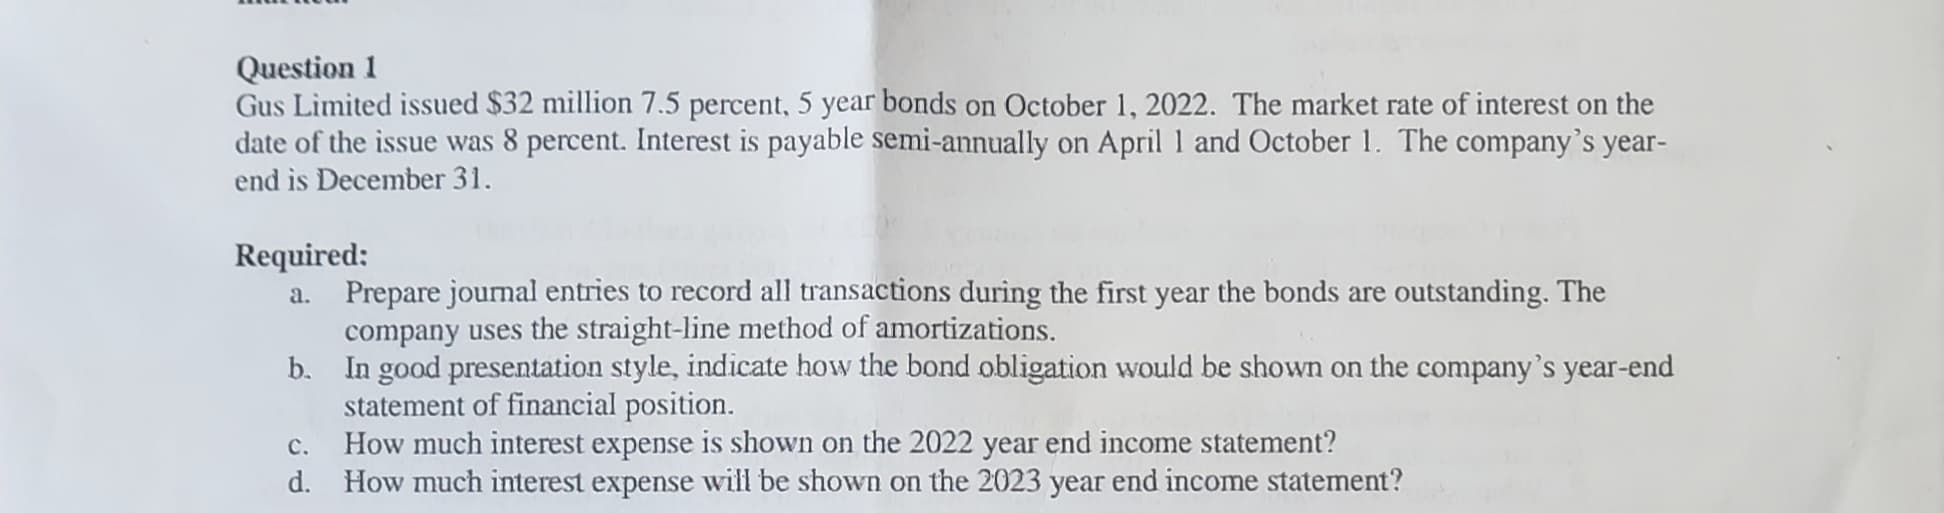 Question 1
Gus Limited issued $32 million 7.5 percent, 5 year bonds on October 1, 2022. The market rate of interest on the
date of the issue was 8 percent. Interest is payable semi-annually on April 1 and October 1. The company's year-
end is December 31.
Required:
a.
Prepare journal entries to record all transactions during the first year the bonds are outstanding. The
company uses the straight-line method of amortizations.
b. In good presentation style, indicate how the bond obligation would be shown on the company's year-end
statement of financial position.
C.
How much interest expense is shown on the 2022 year end income statement?
d. How much interest expense will be shown on the 2023 year end income statement?